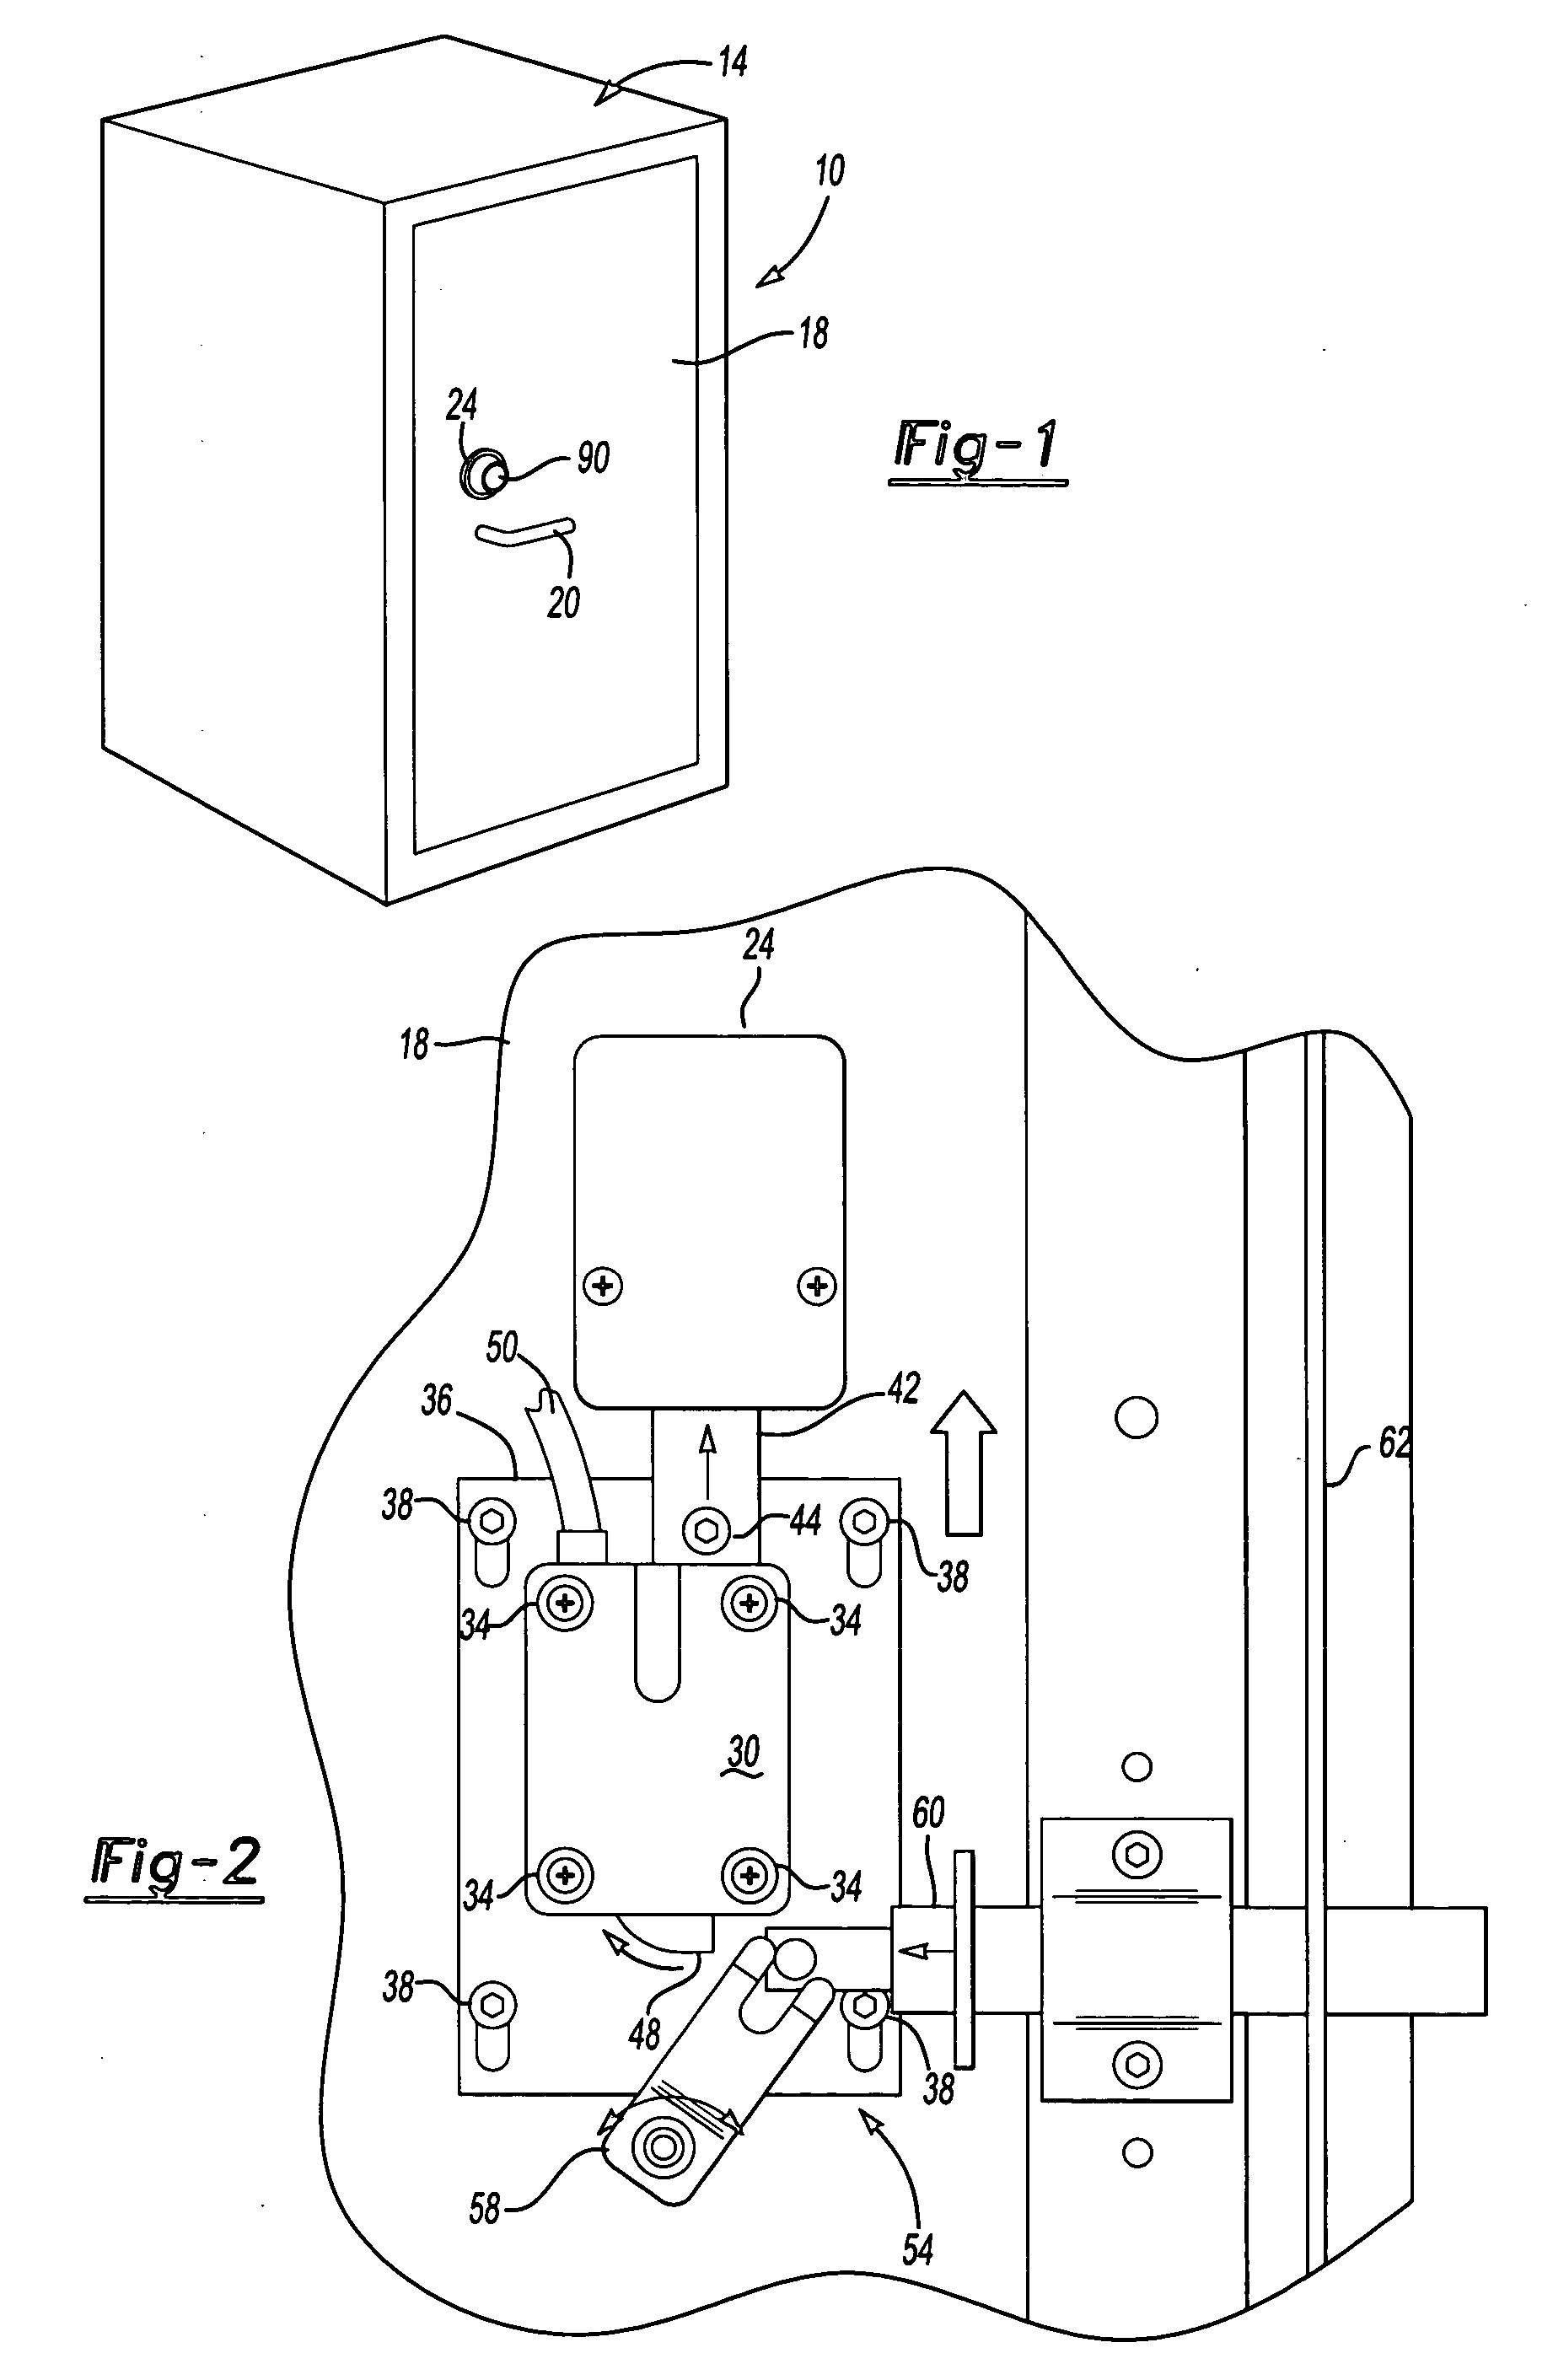 Manual override for use with an electric safe